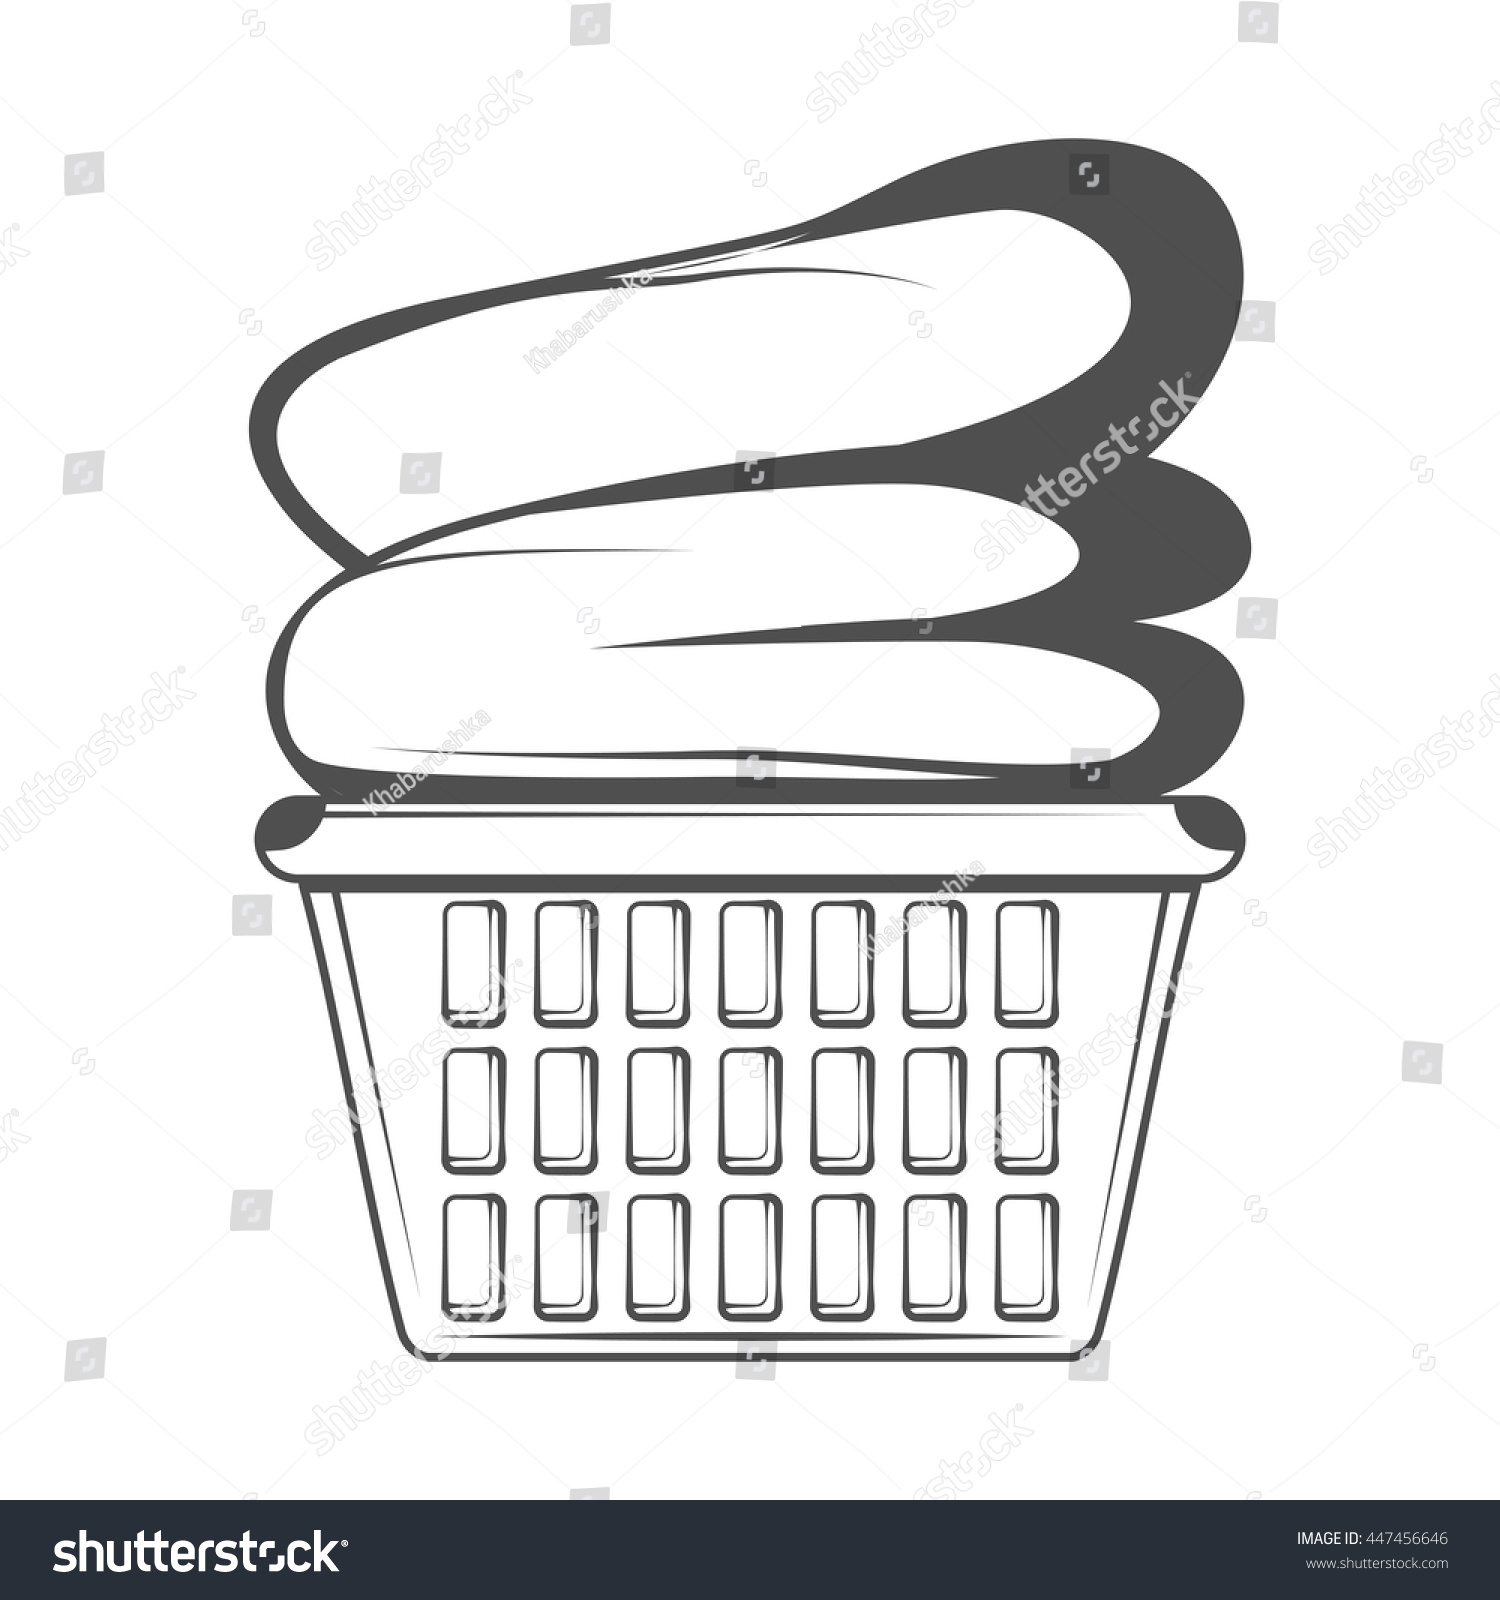 Download Vector Illustration Laundry Basket Clothes Stock Vector ...